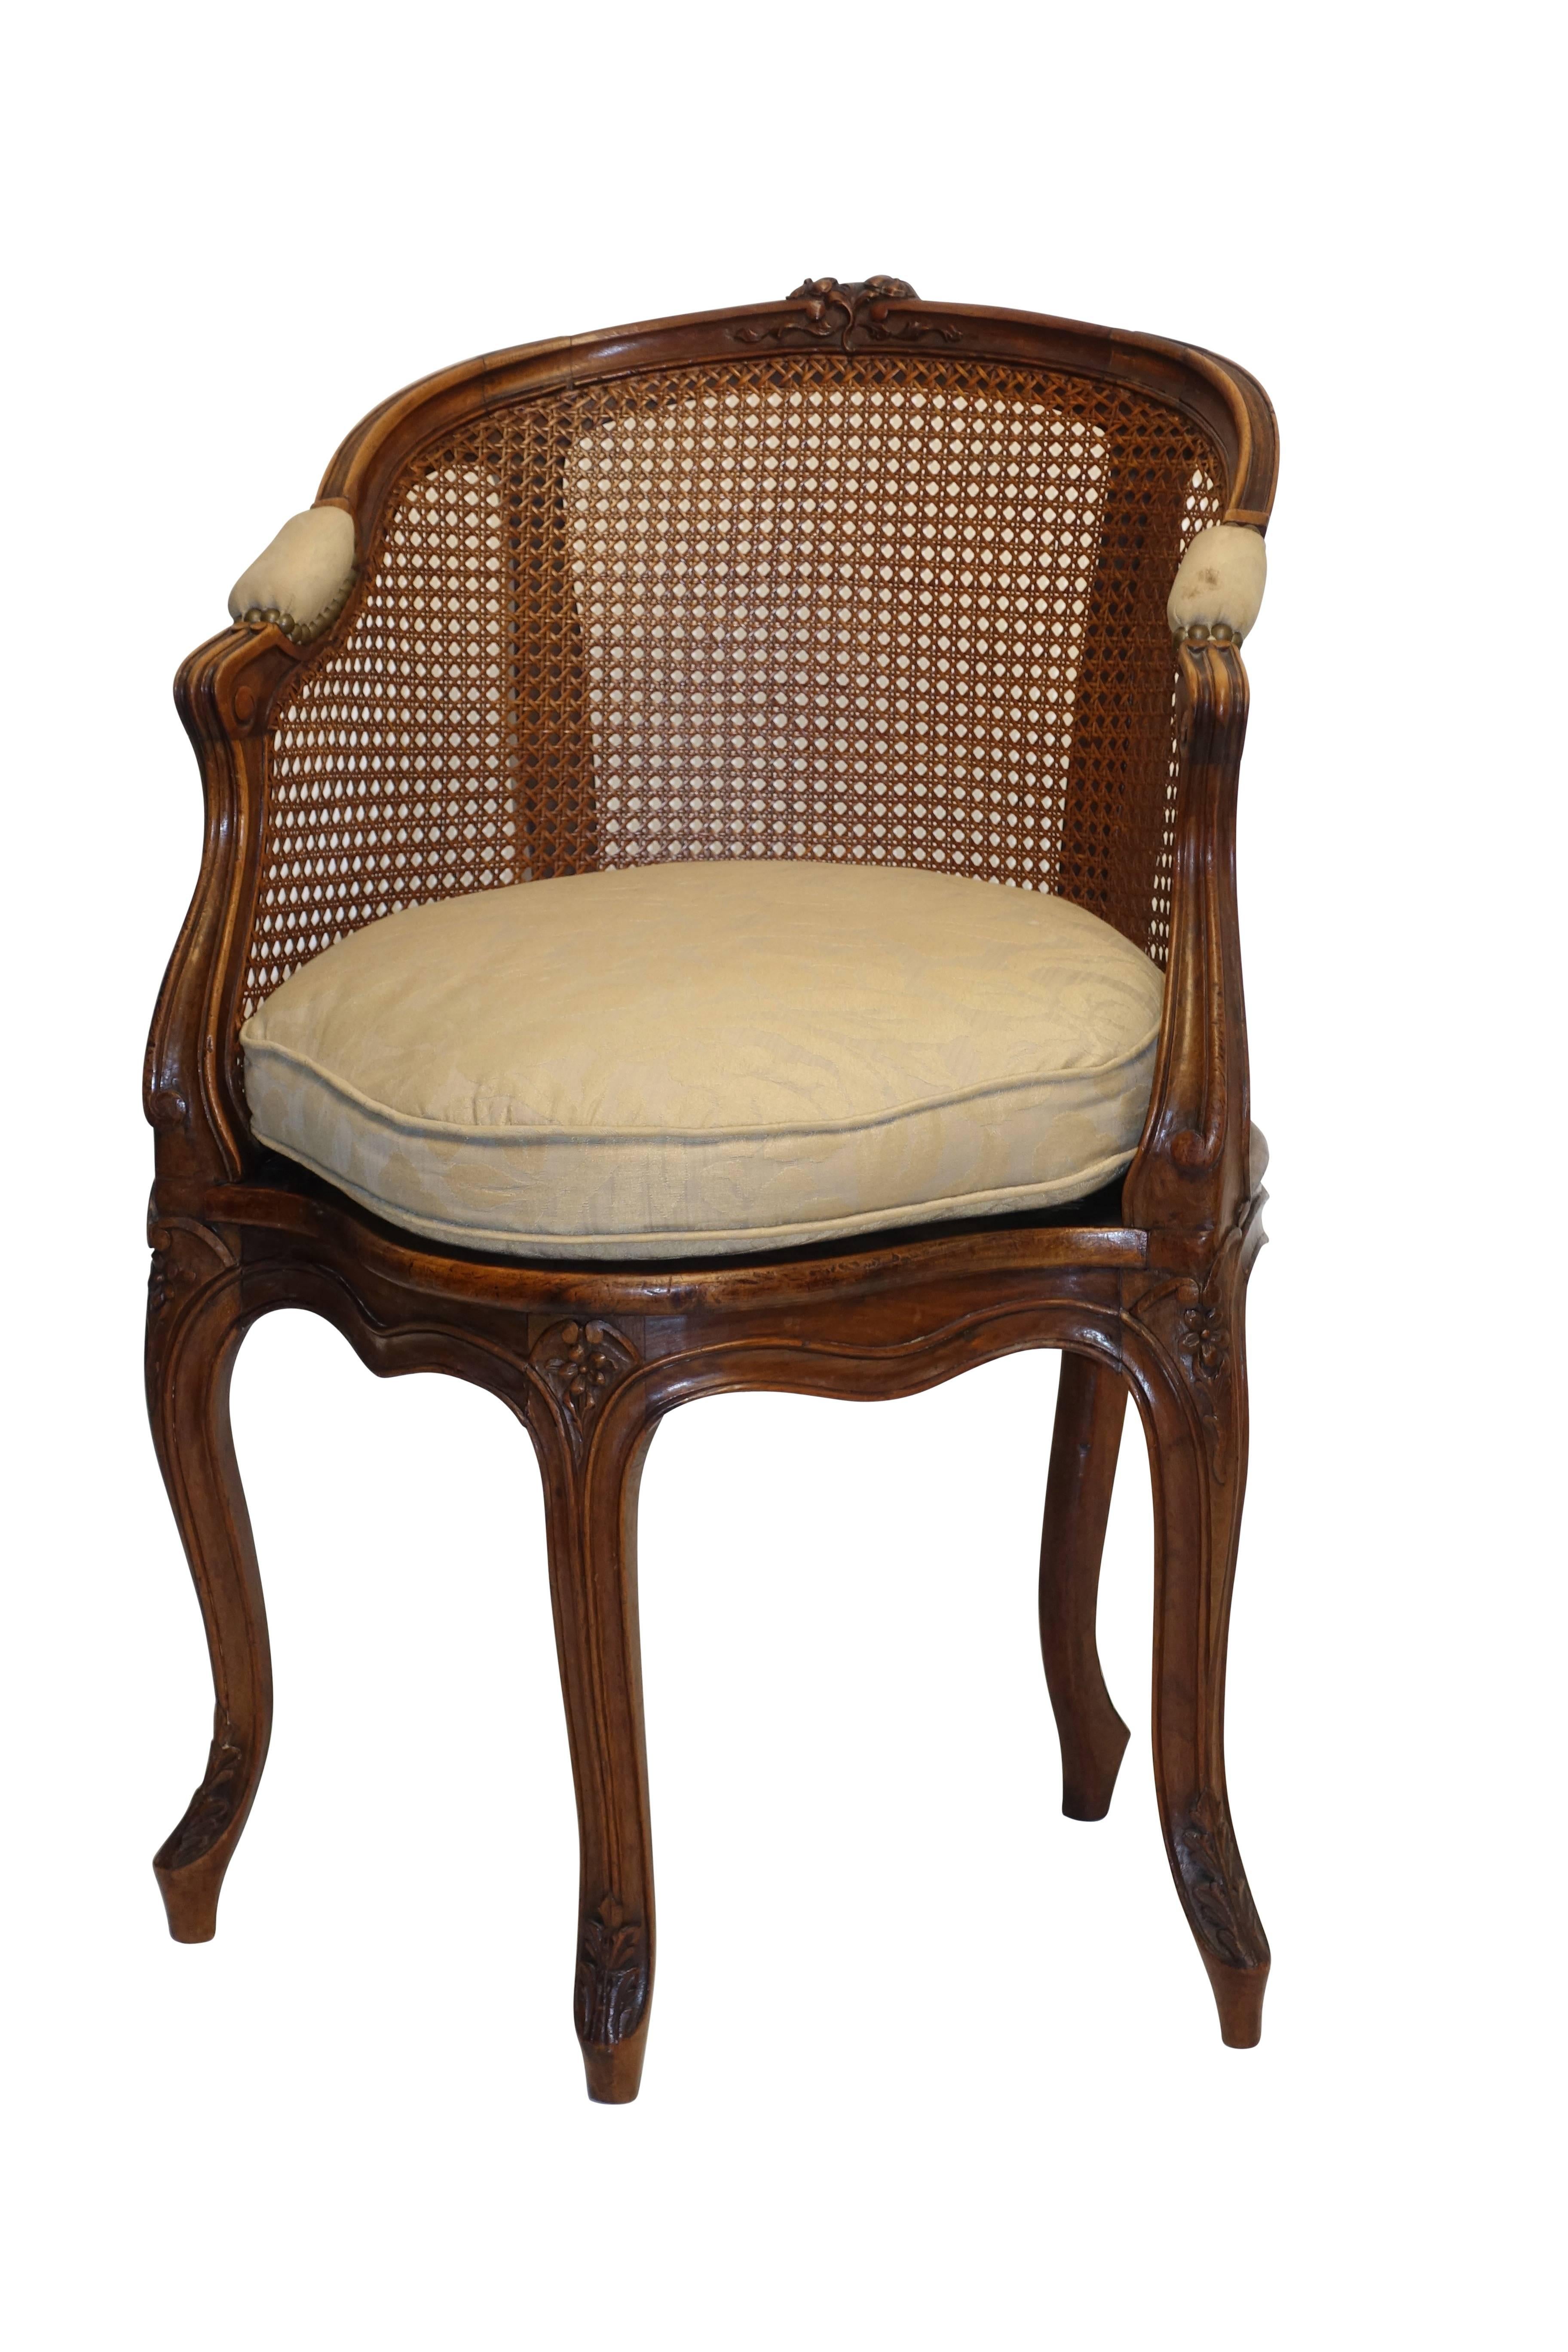 Louis XVI style hand-carved and caned walnut chaise de bureau with upholstered cushion. Carved floral and ribbon design at back rail and on the knees, standing on five cabriole legs ending in scroll feet, France, circa 1880.